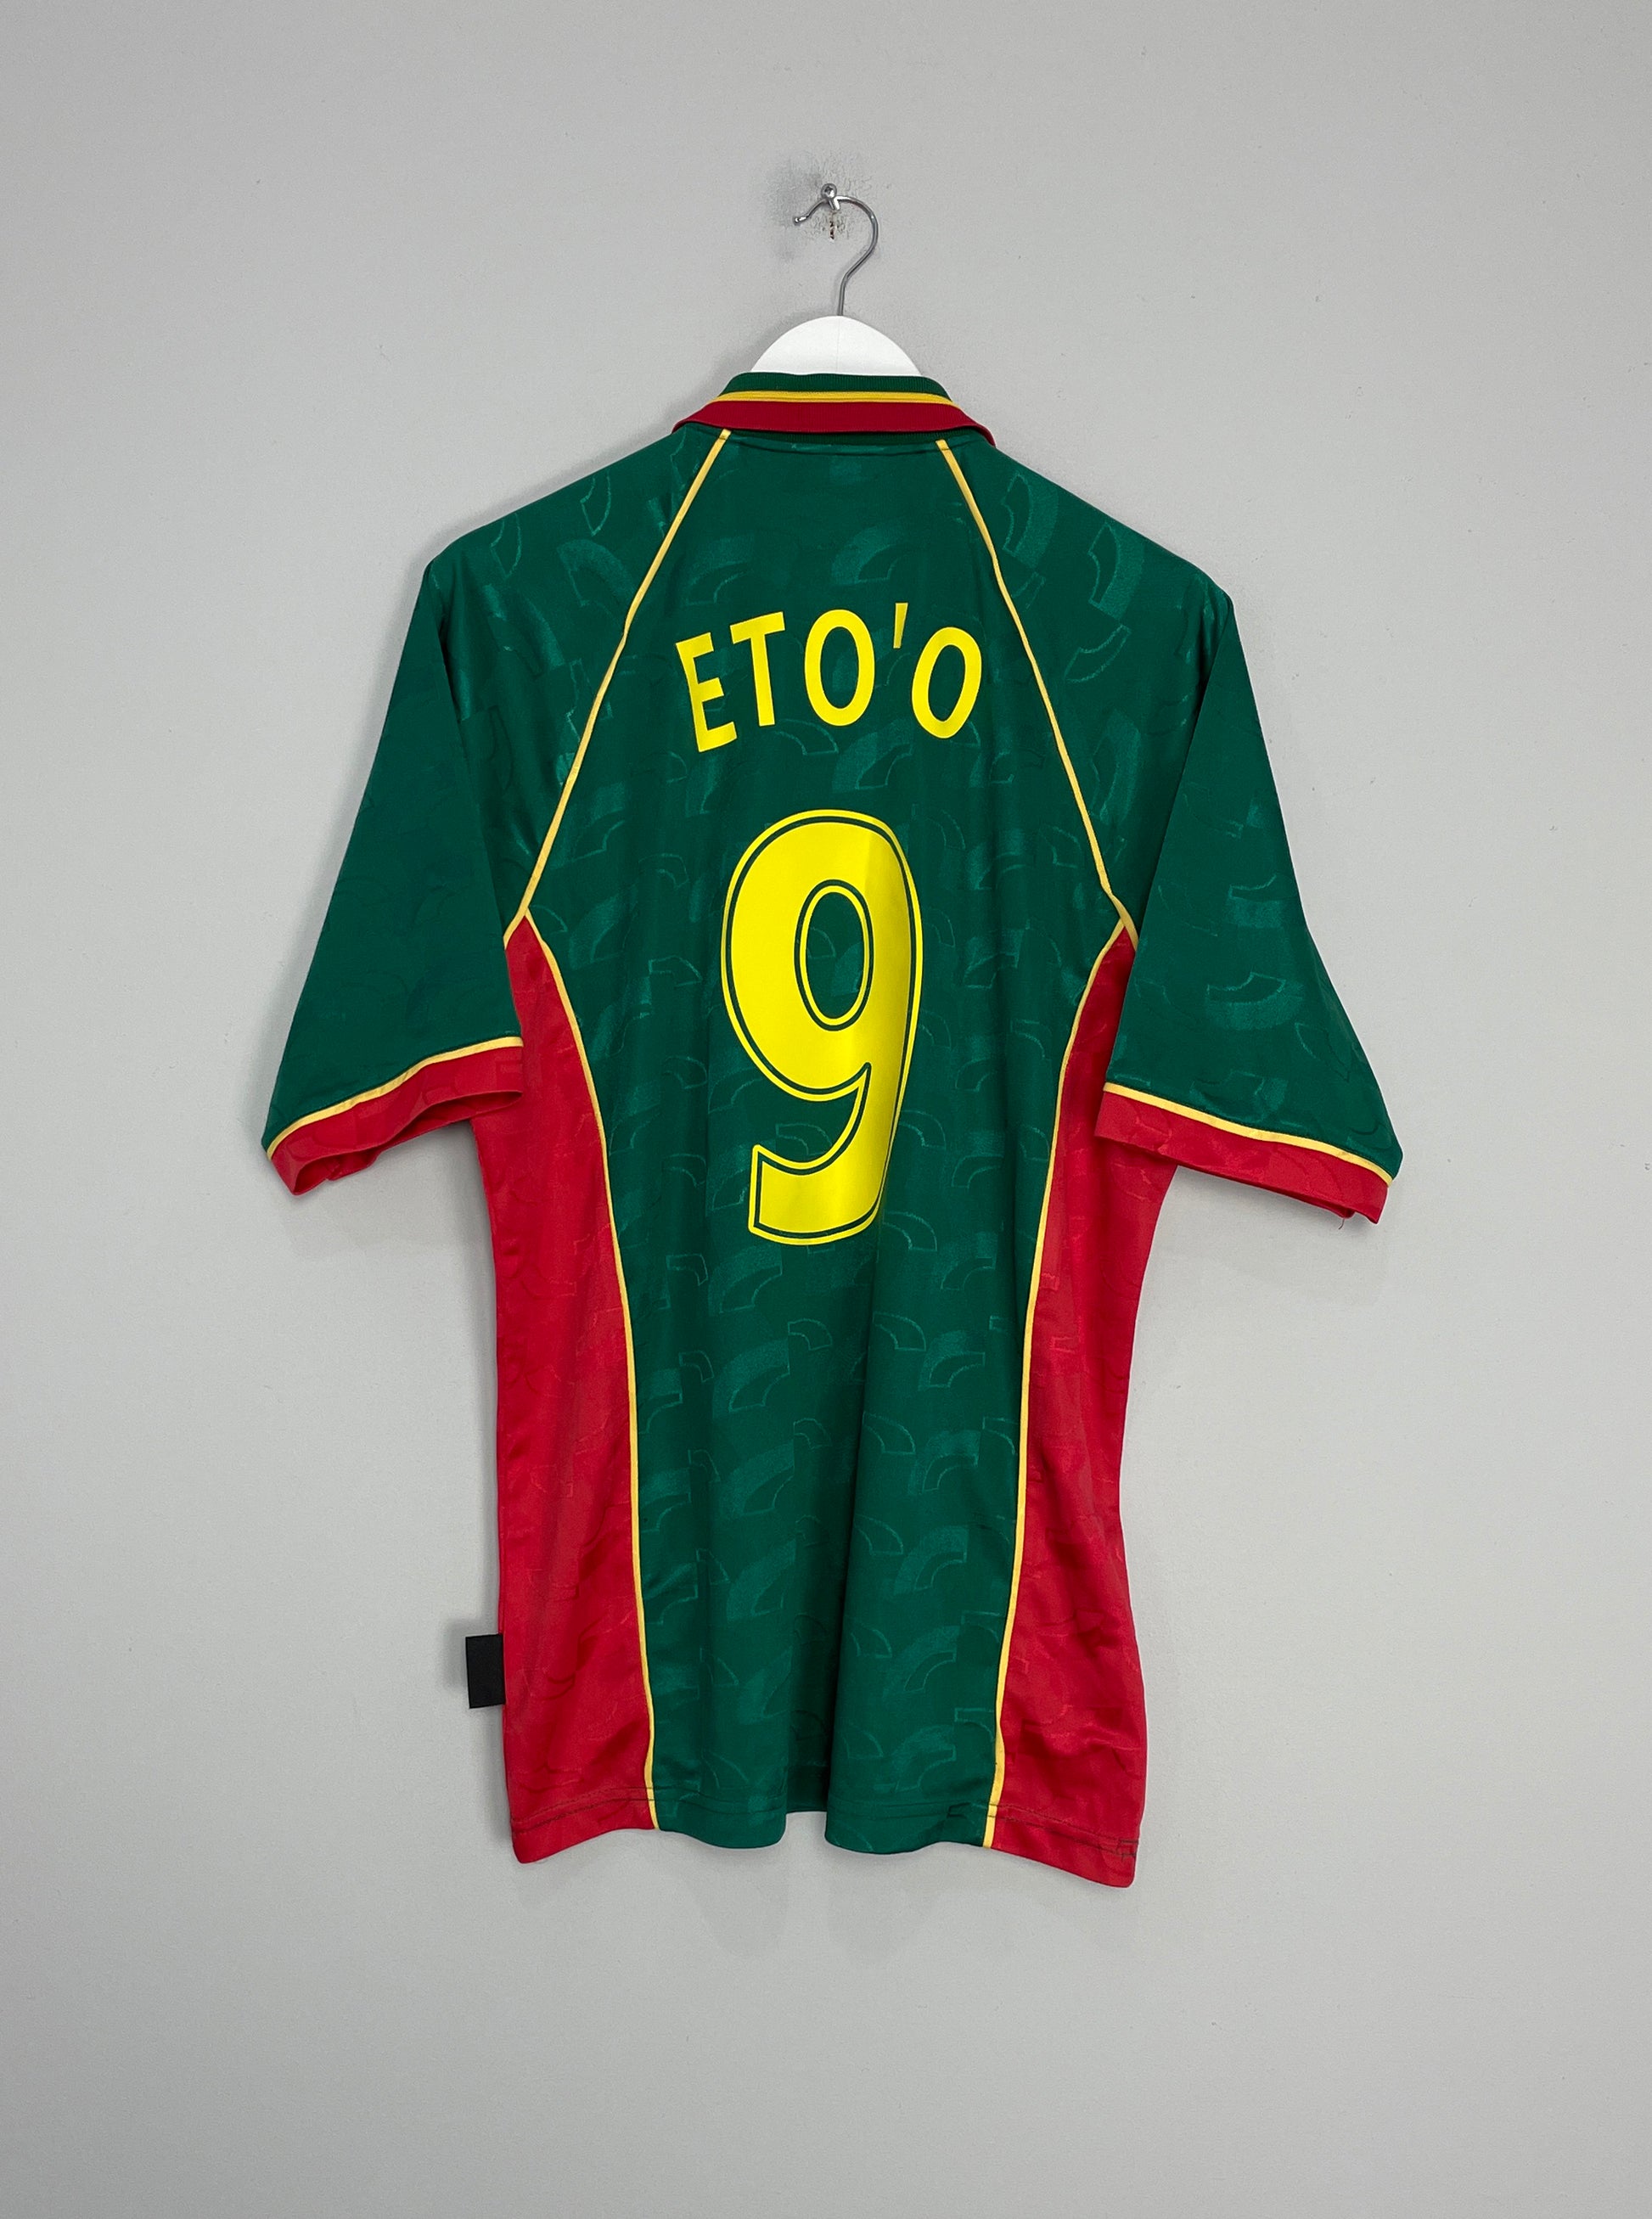 Image of the Cameroon Eto'o shirt from the 1998/00 season